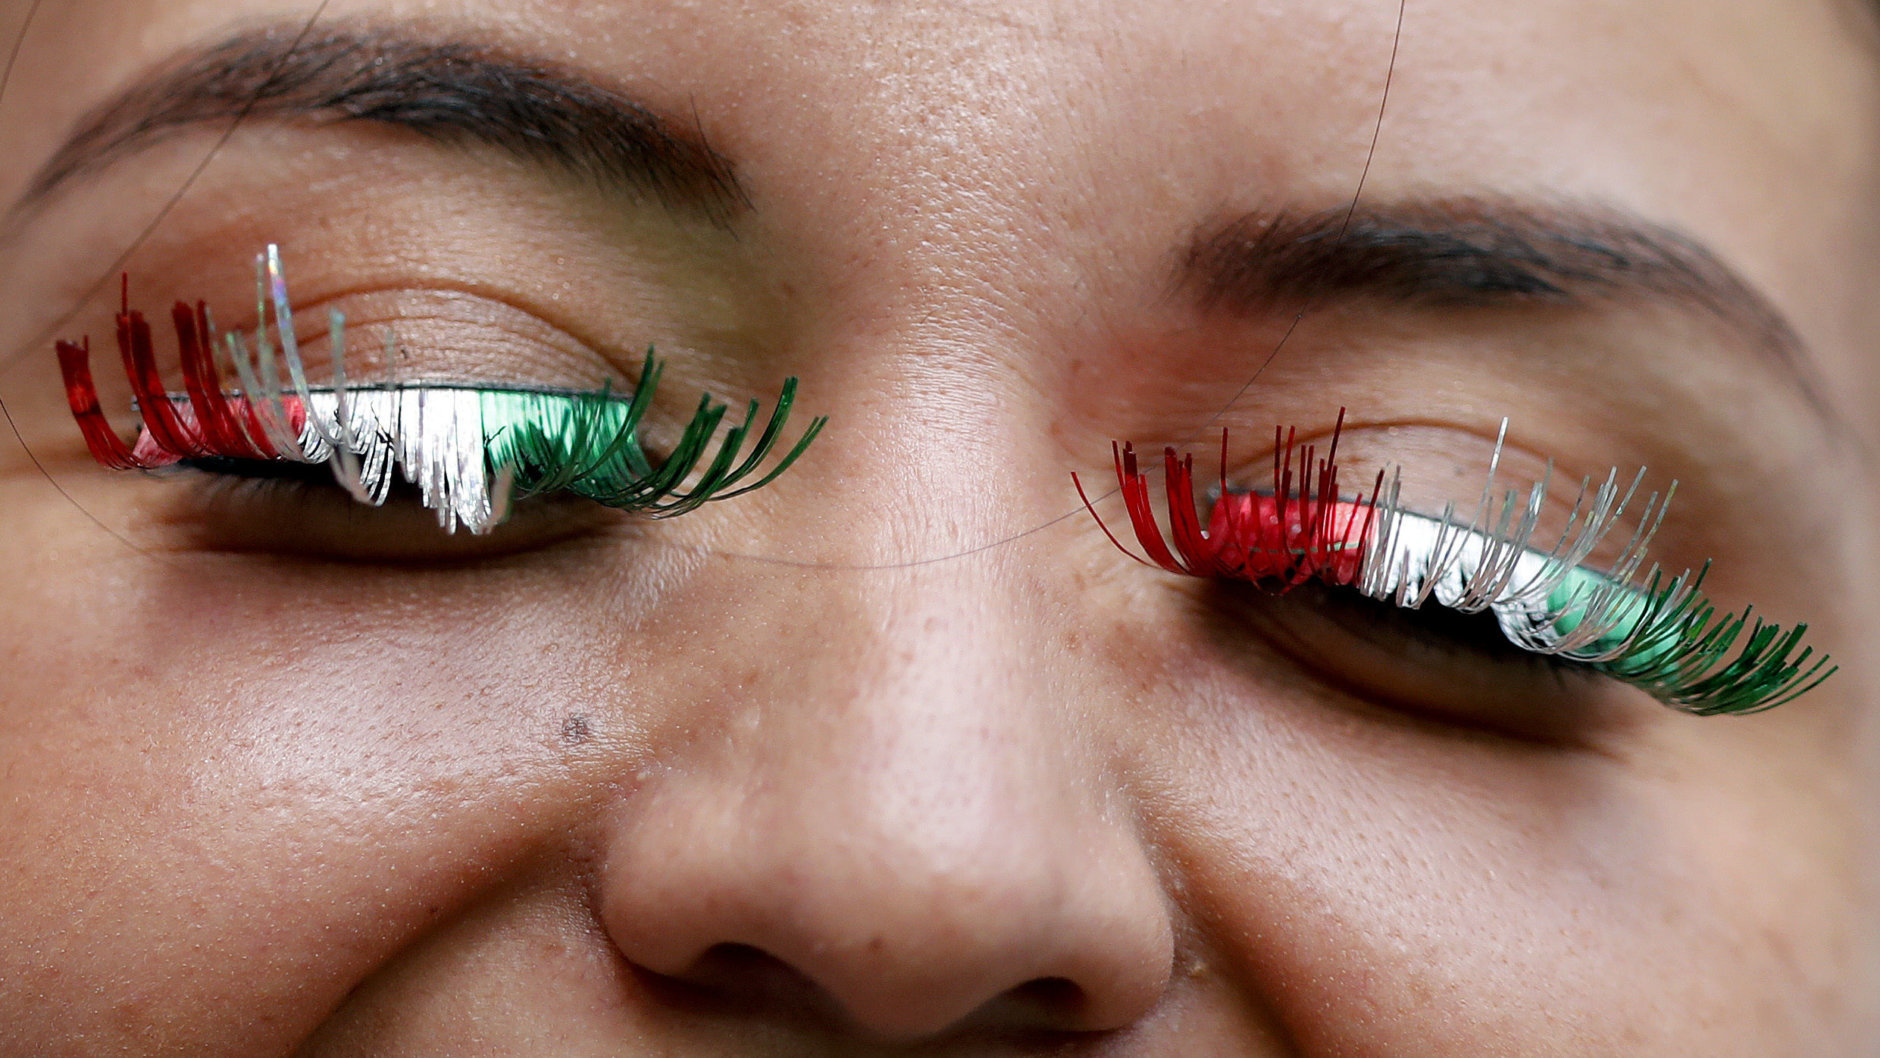 A supporter of Mexico arrives for the round of 16 match between Brazil and Mexico at the 2018 soccer World Cup in the Samara Arena, in Samara, Russia, Monday, July 2, 2018. (AP Photo/Frank Augstein)